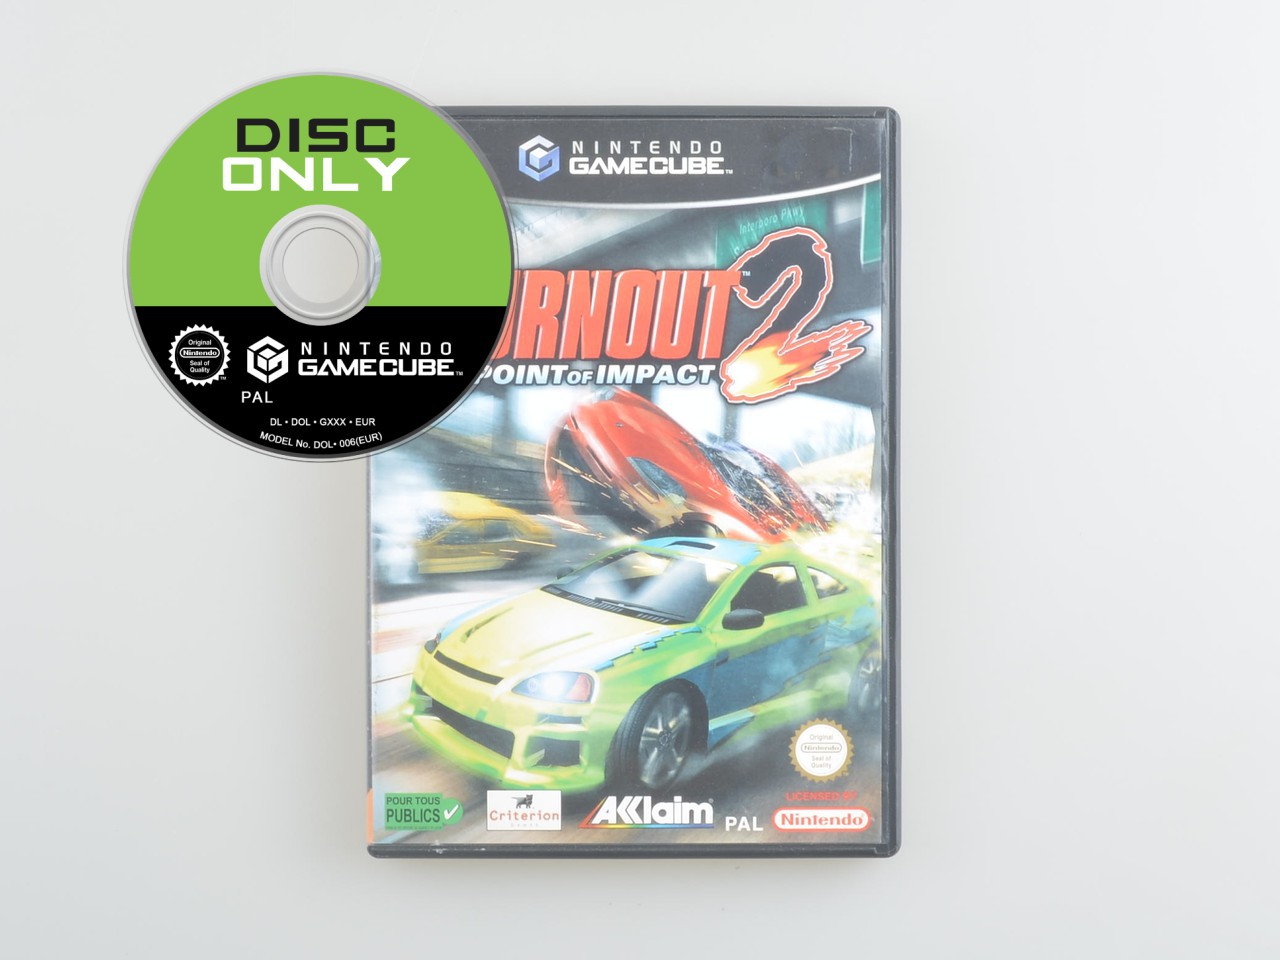 Burnout 2: Point of Impact - Disc Only Kopen | Gamecube Games